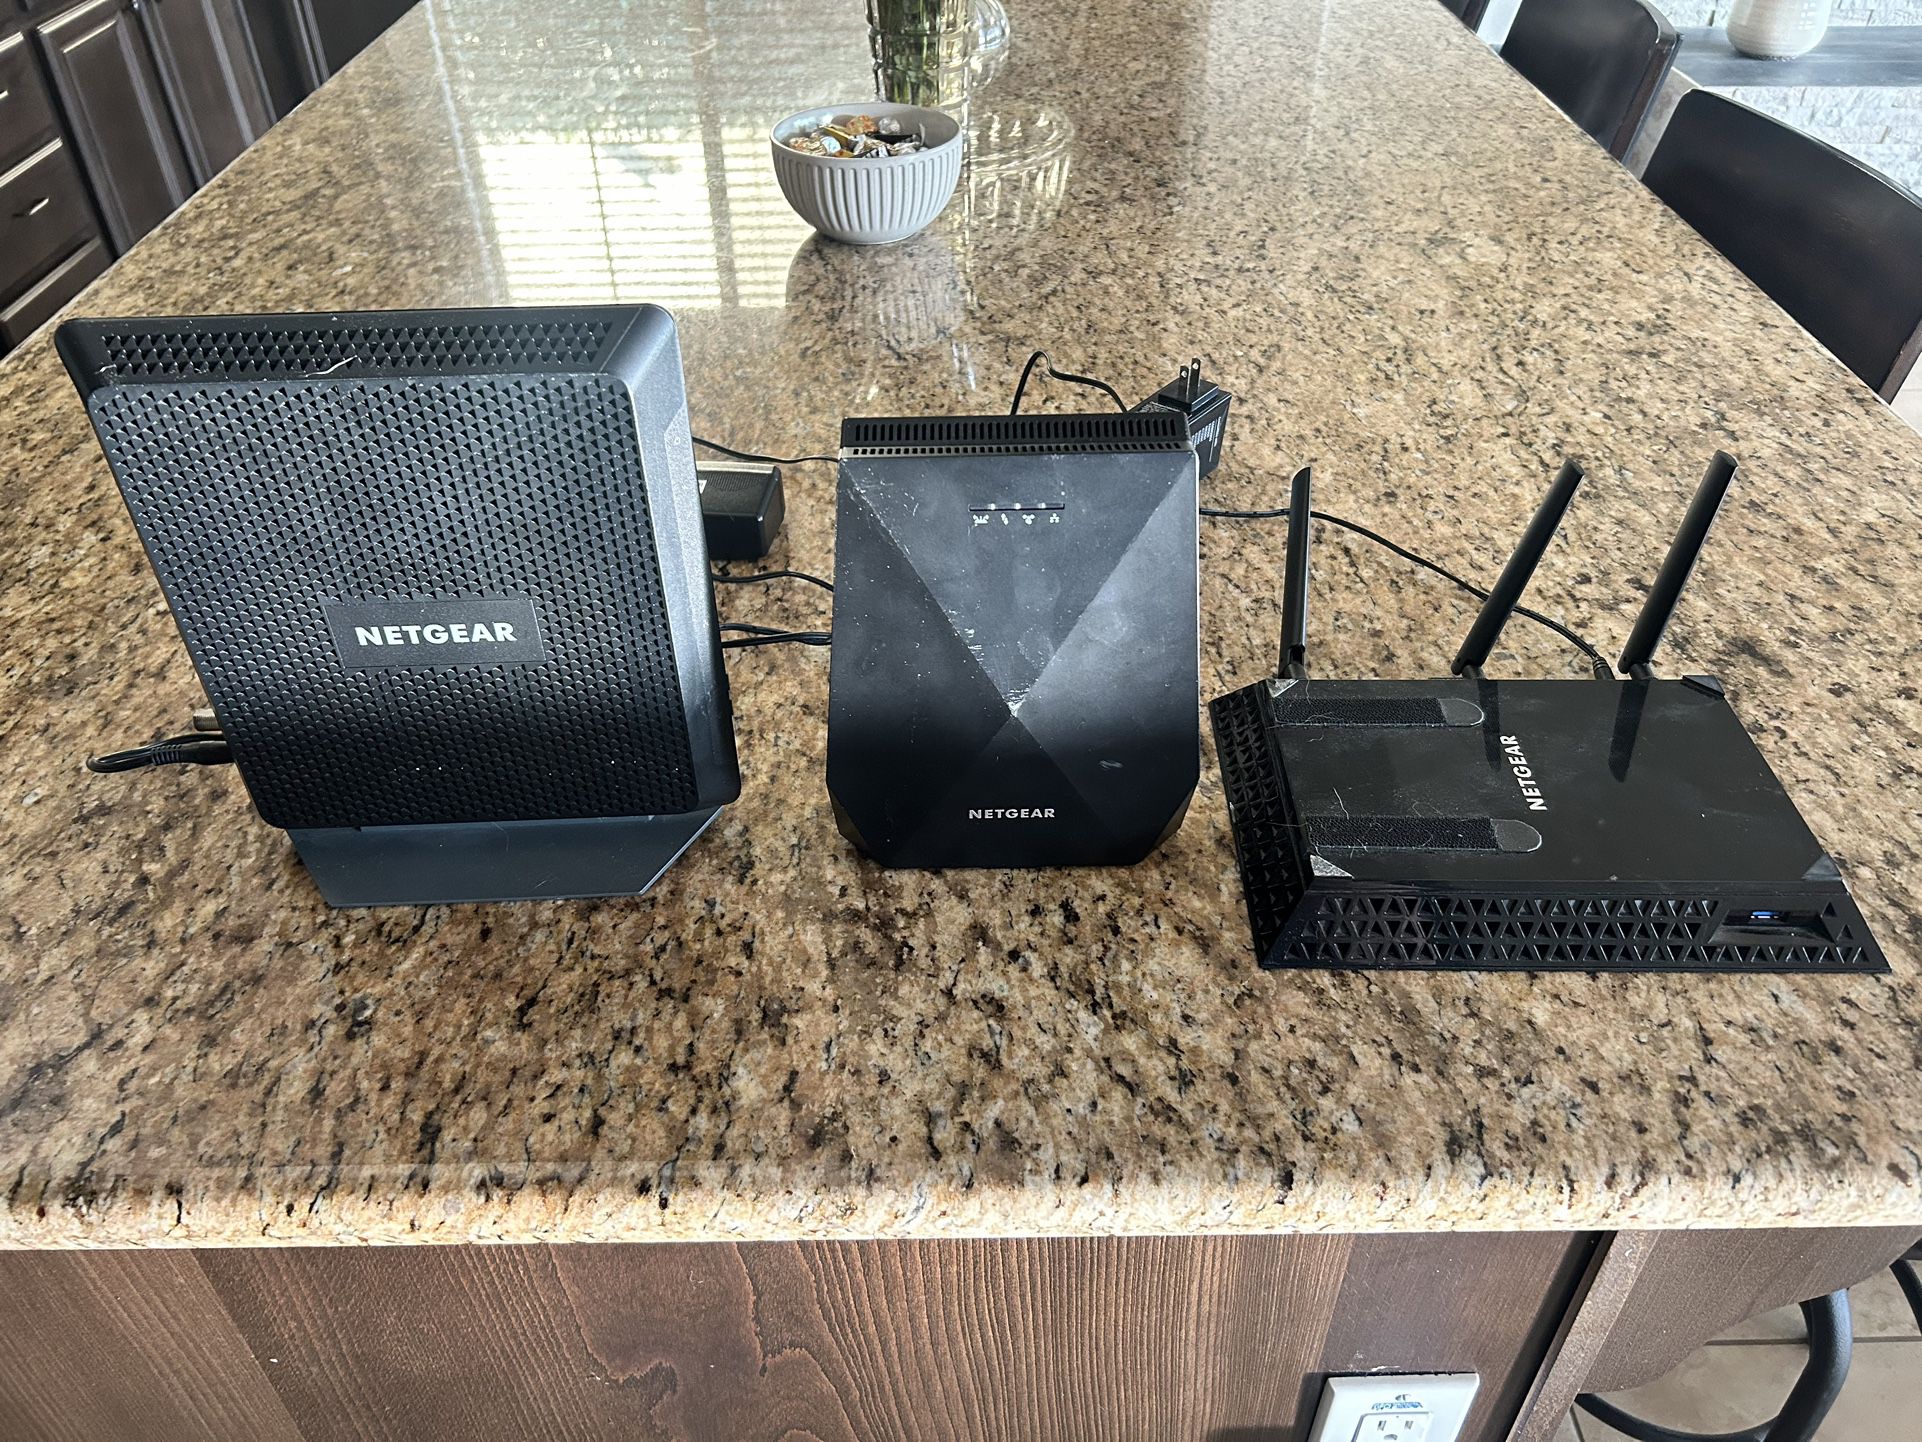 Netgear Modem And Routers